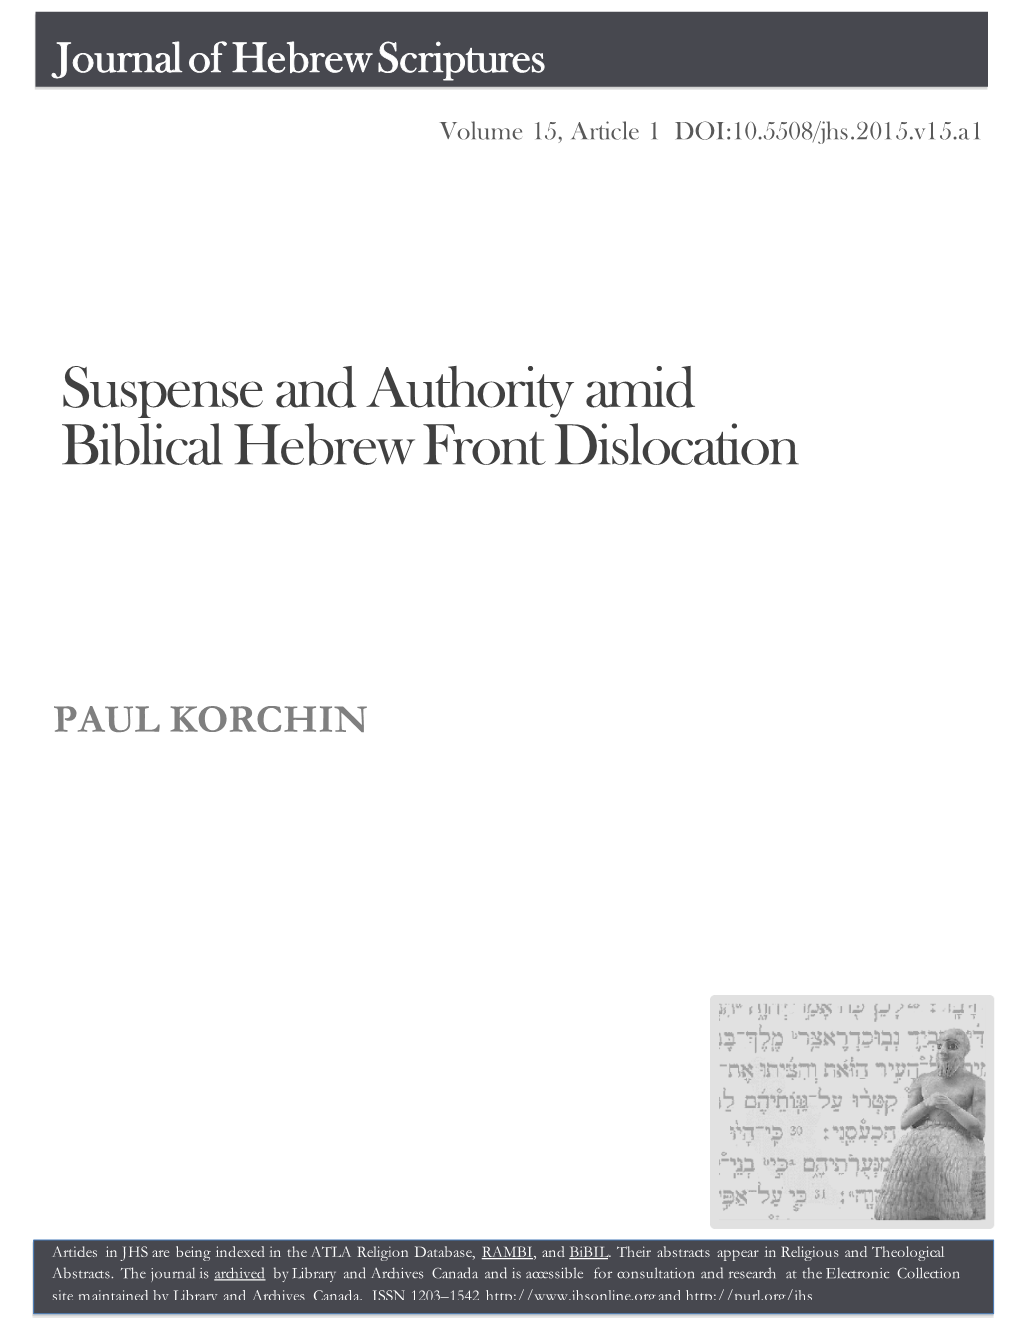 Suspense and Authority Amid Biblical Hebrew Front Dislocation